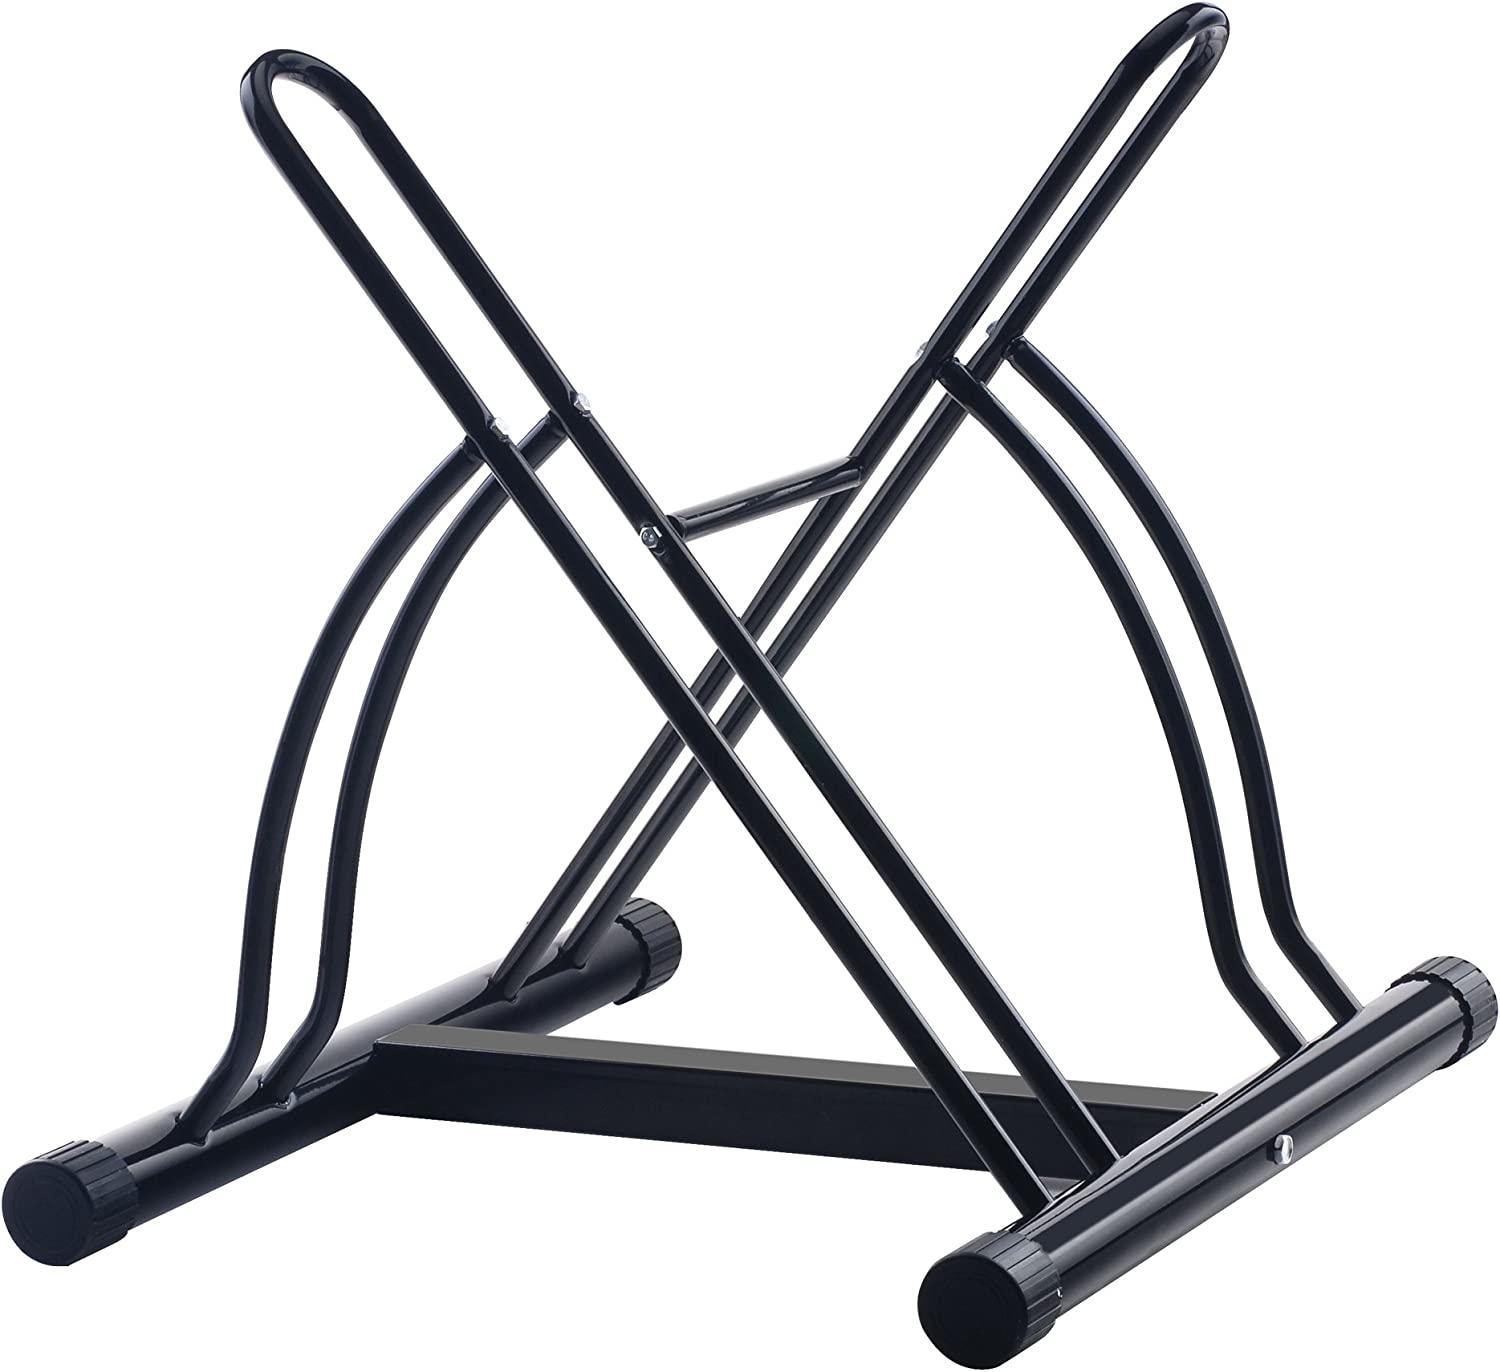 RAD Cycle Mighty 2-Bike Rack Floor Stand for $24.88